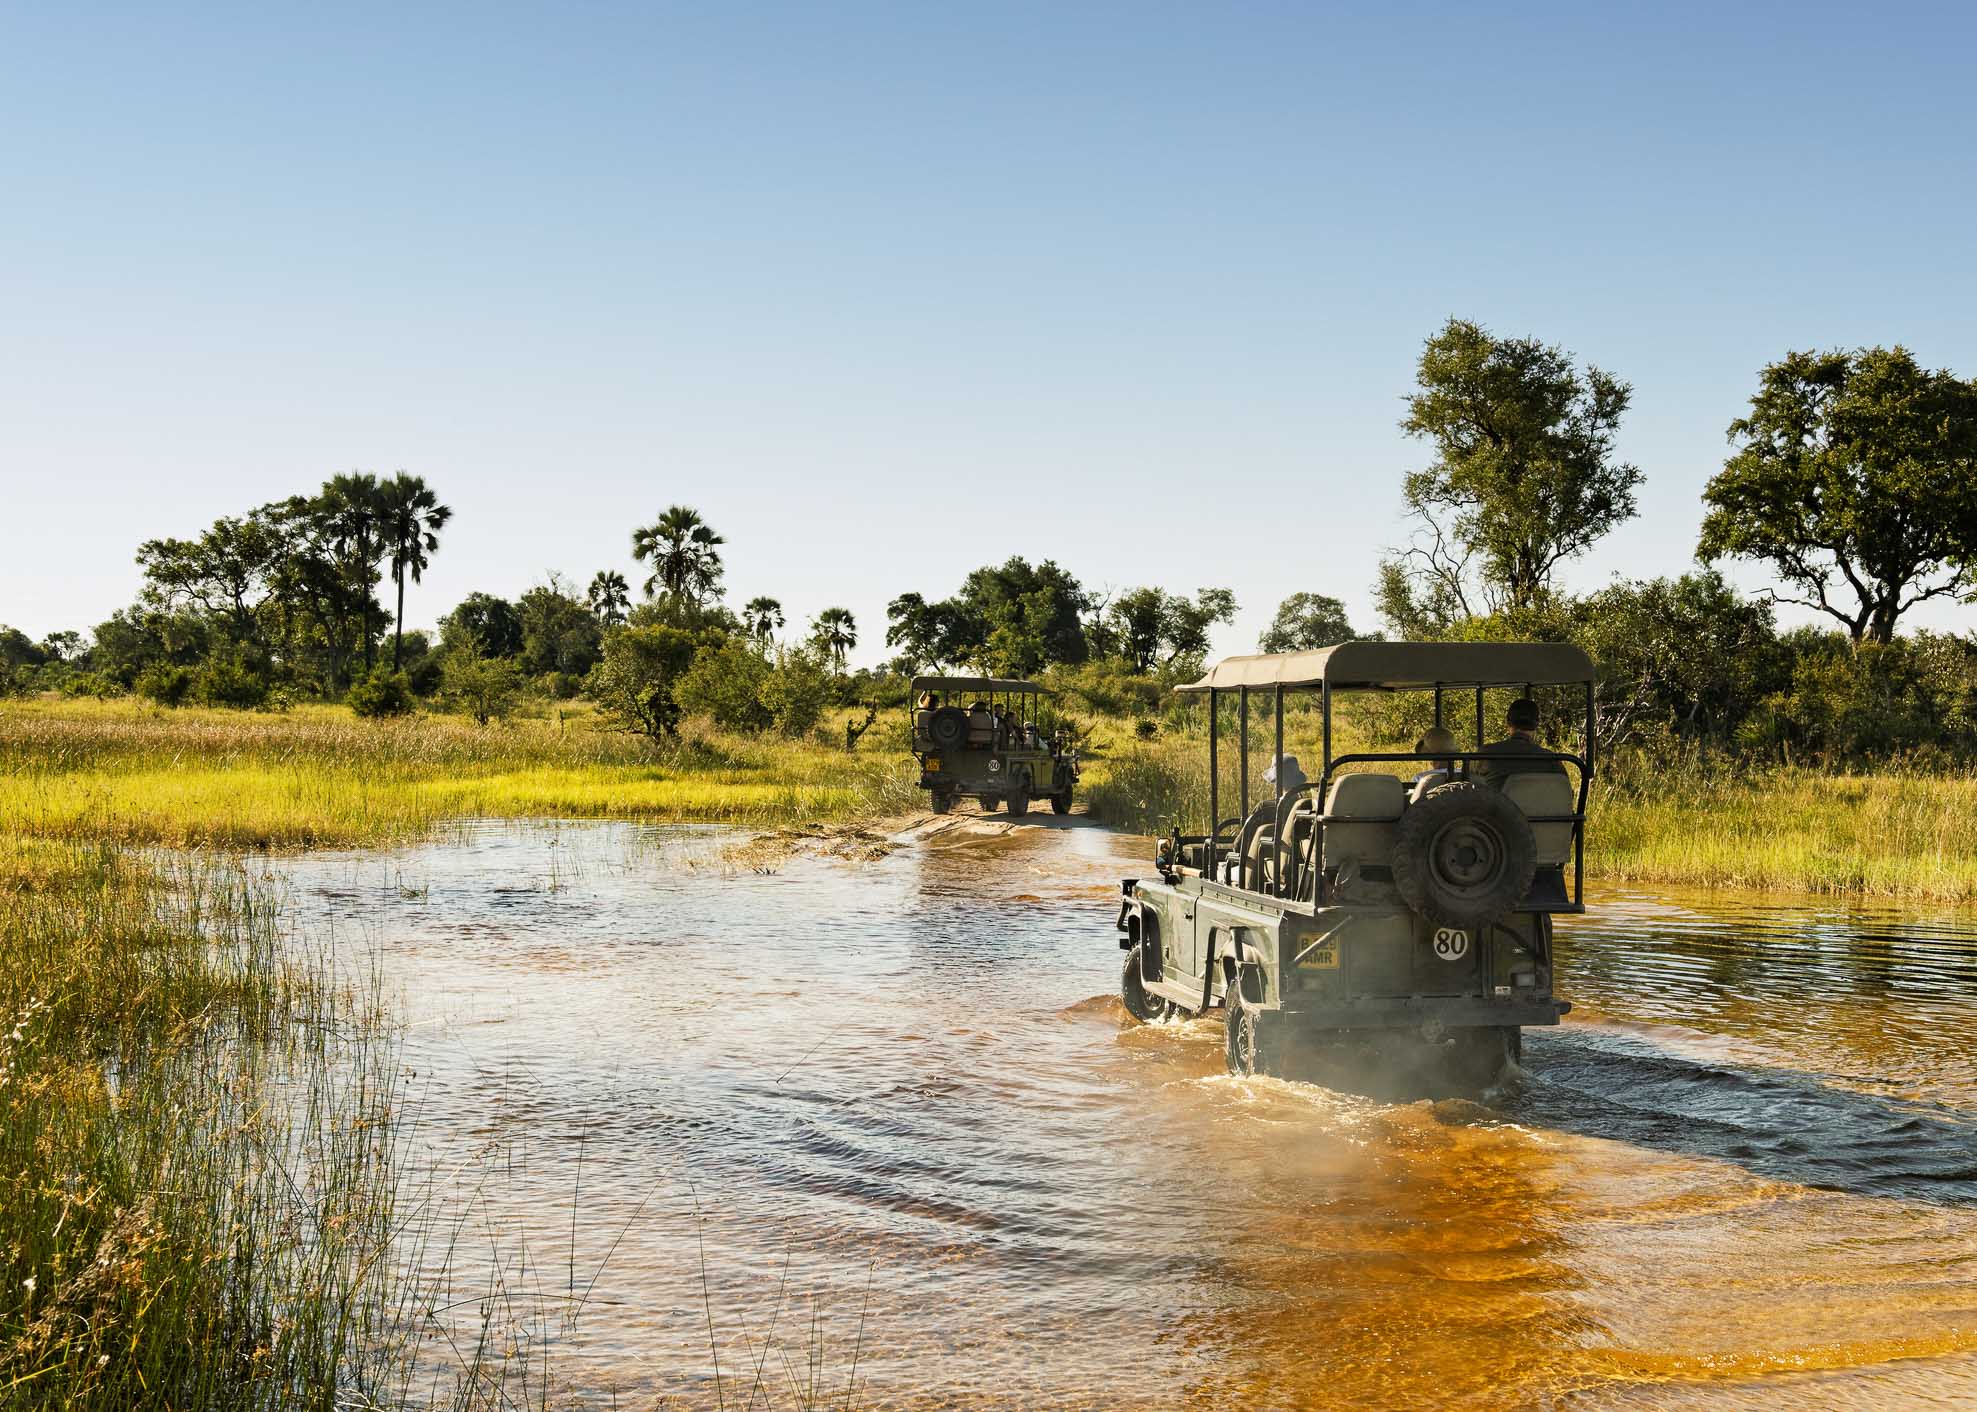 Safari vehicles with tourists driving through the water at the end of the rainy season during a game drive in the Okavango Delta.